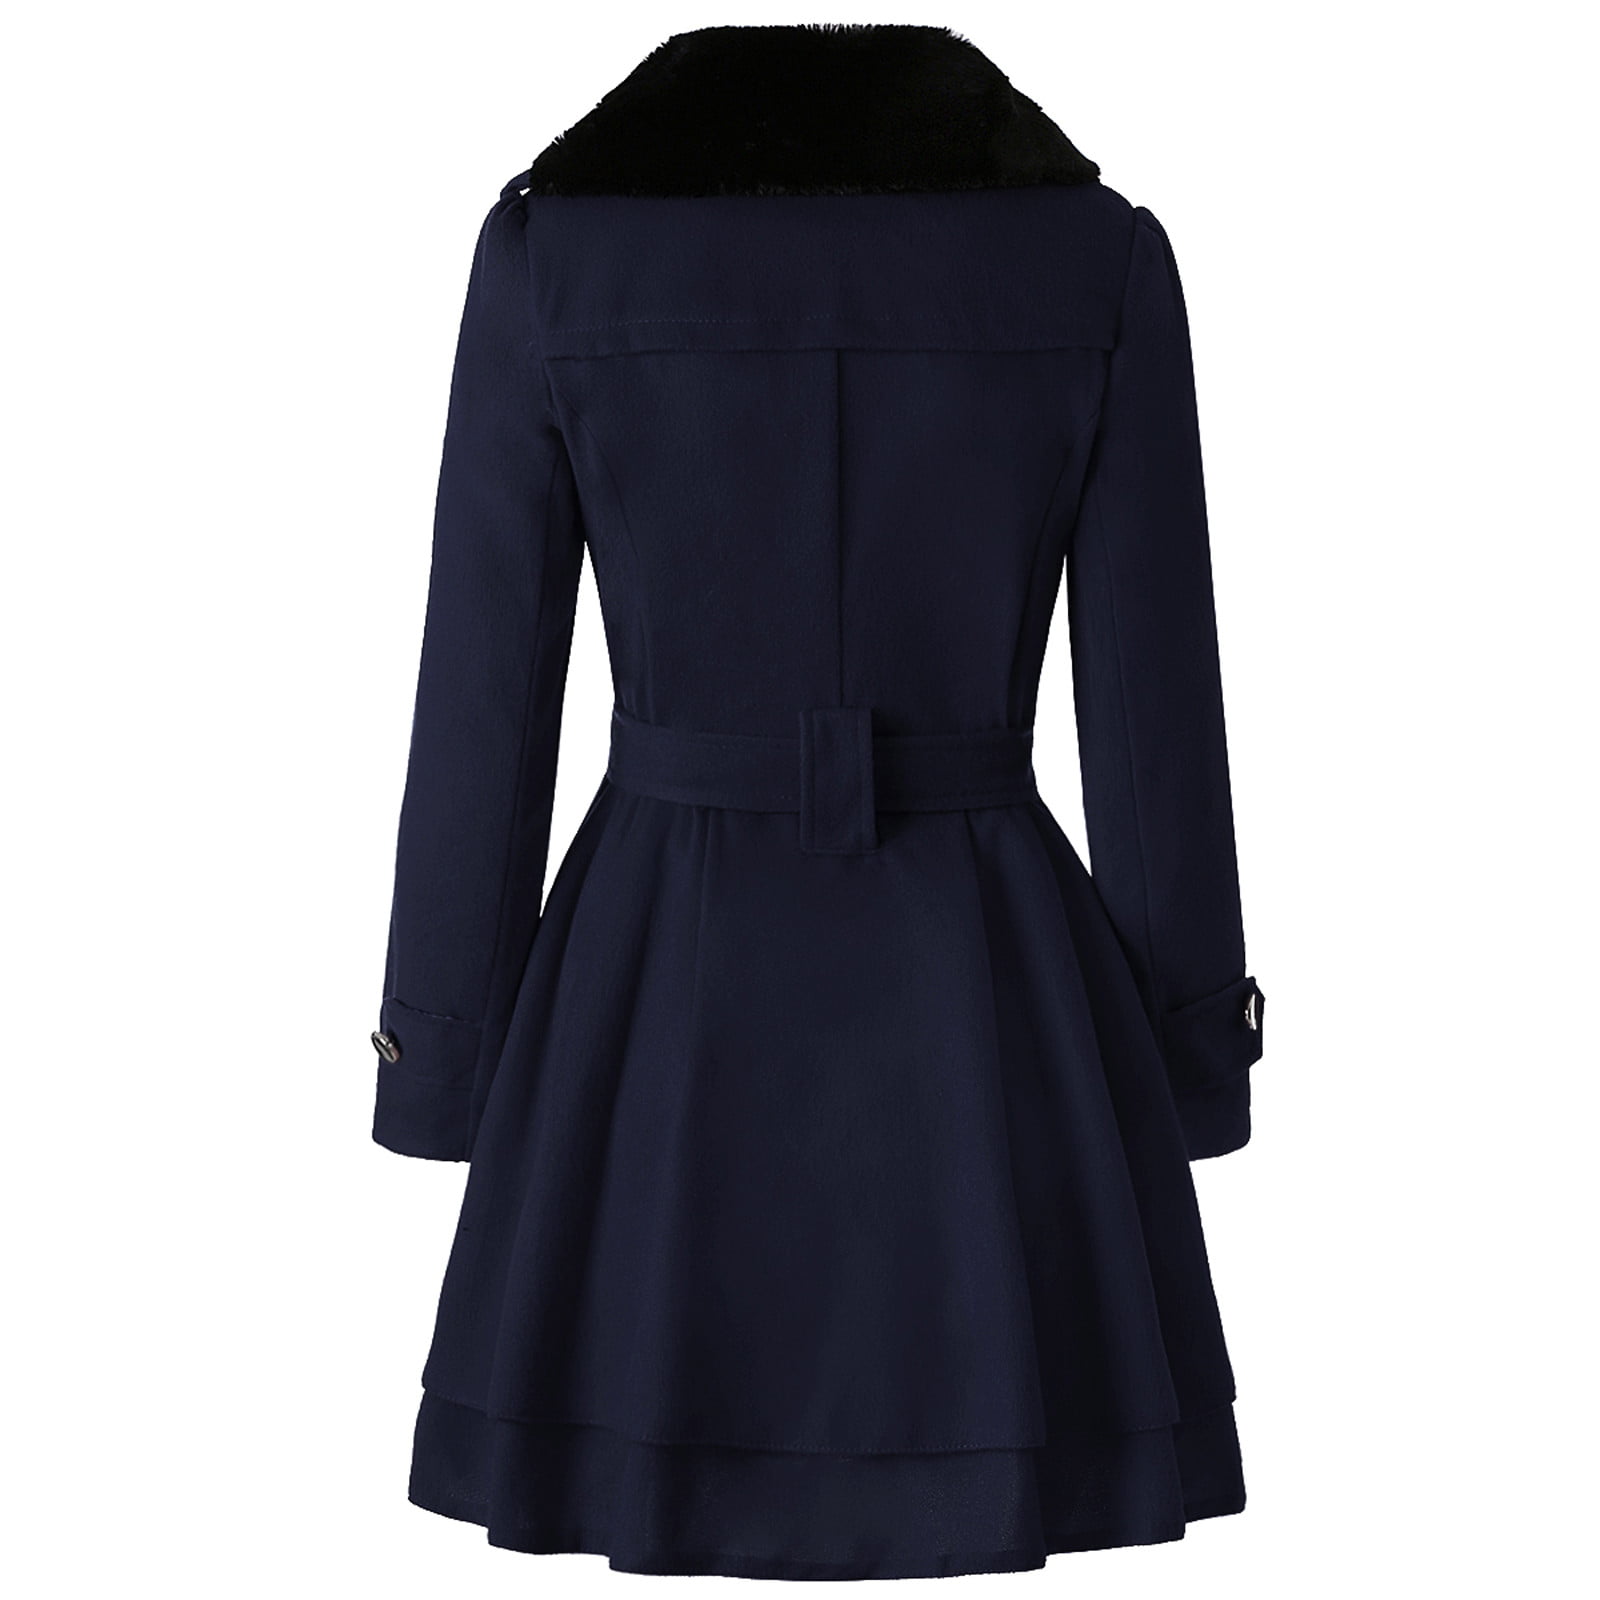 Elegant Slim Fit Wool Coat With Fur Hood For Women Abrigos Mujer Invierno  From Zjxrm, $38.47